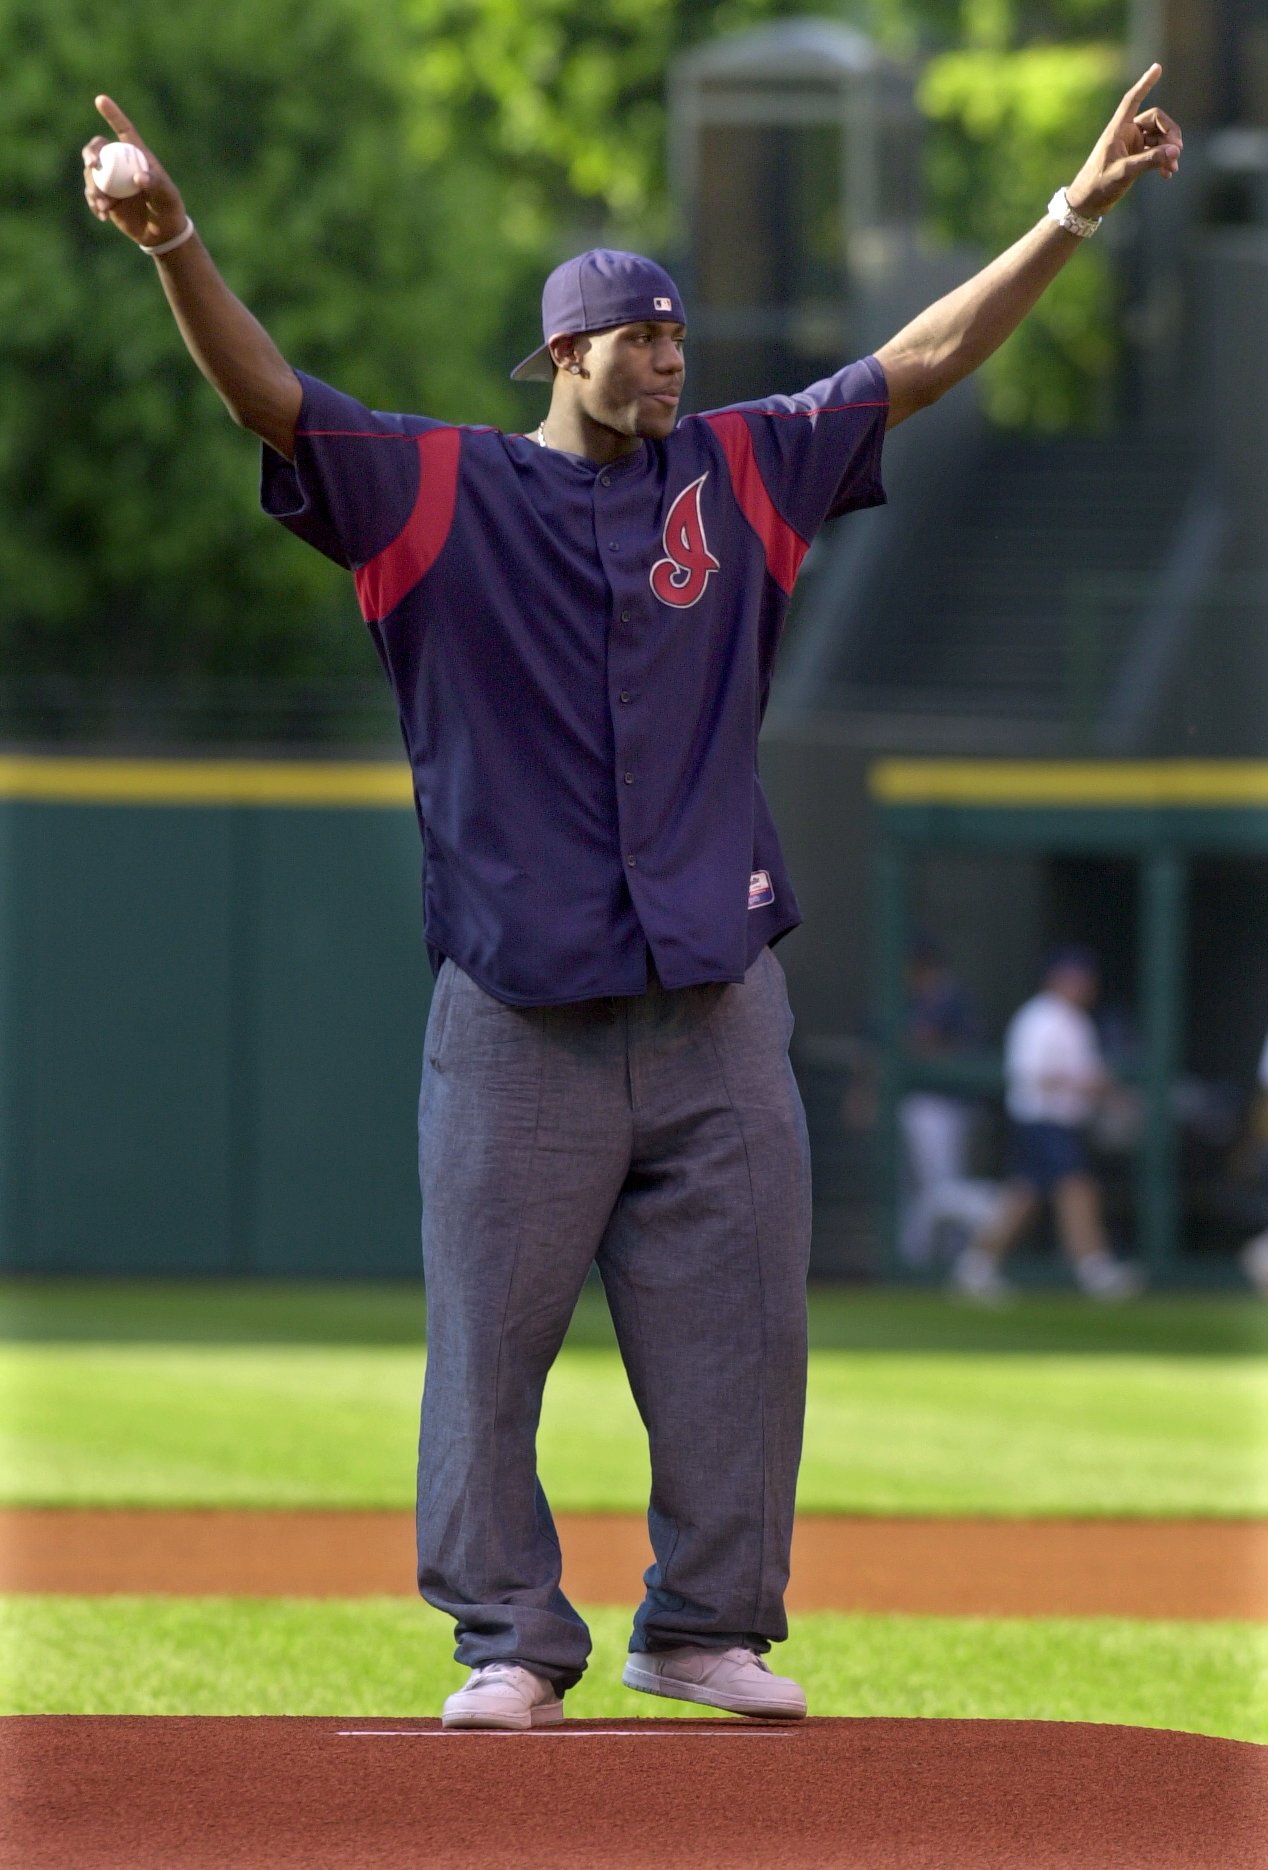 Cleveland Indians had the Cavaliers #1 draft pick LeBron James throw out the first pitch before last nights game against the Cincinnati Reds.  LeBron acknowledges the cheers from the fans before he threw the pitch.  Shot on June 27, 2003.  (Chuck Crow/The Plain Dealer)